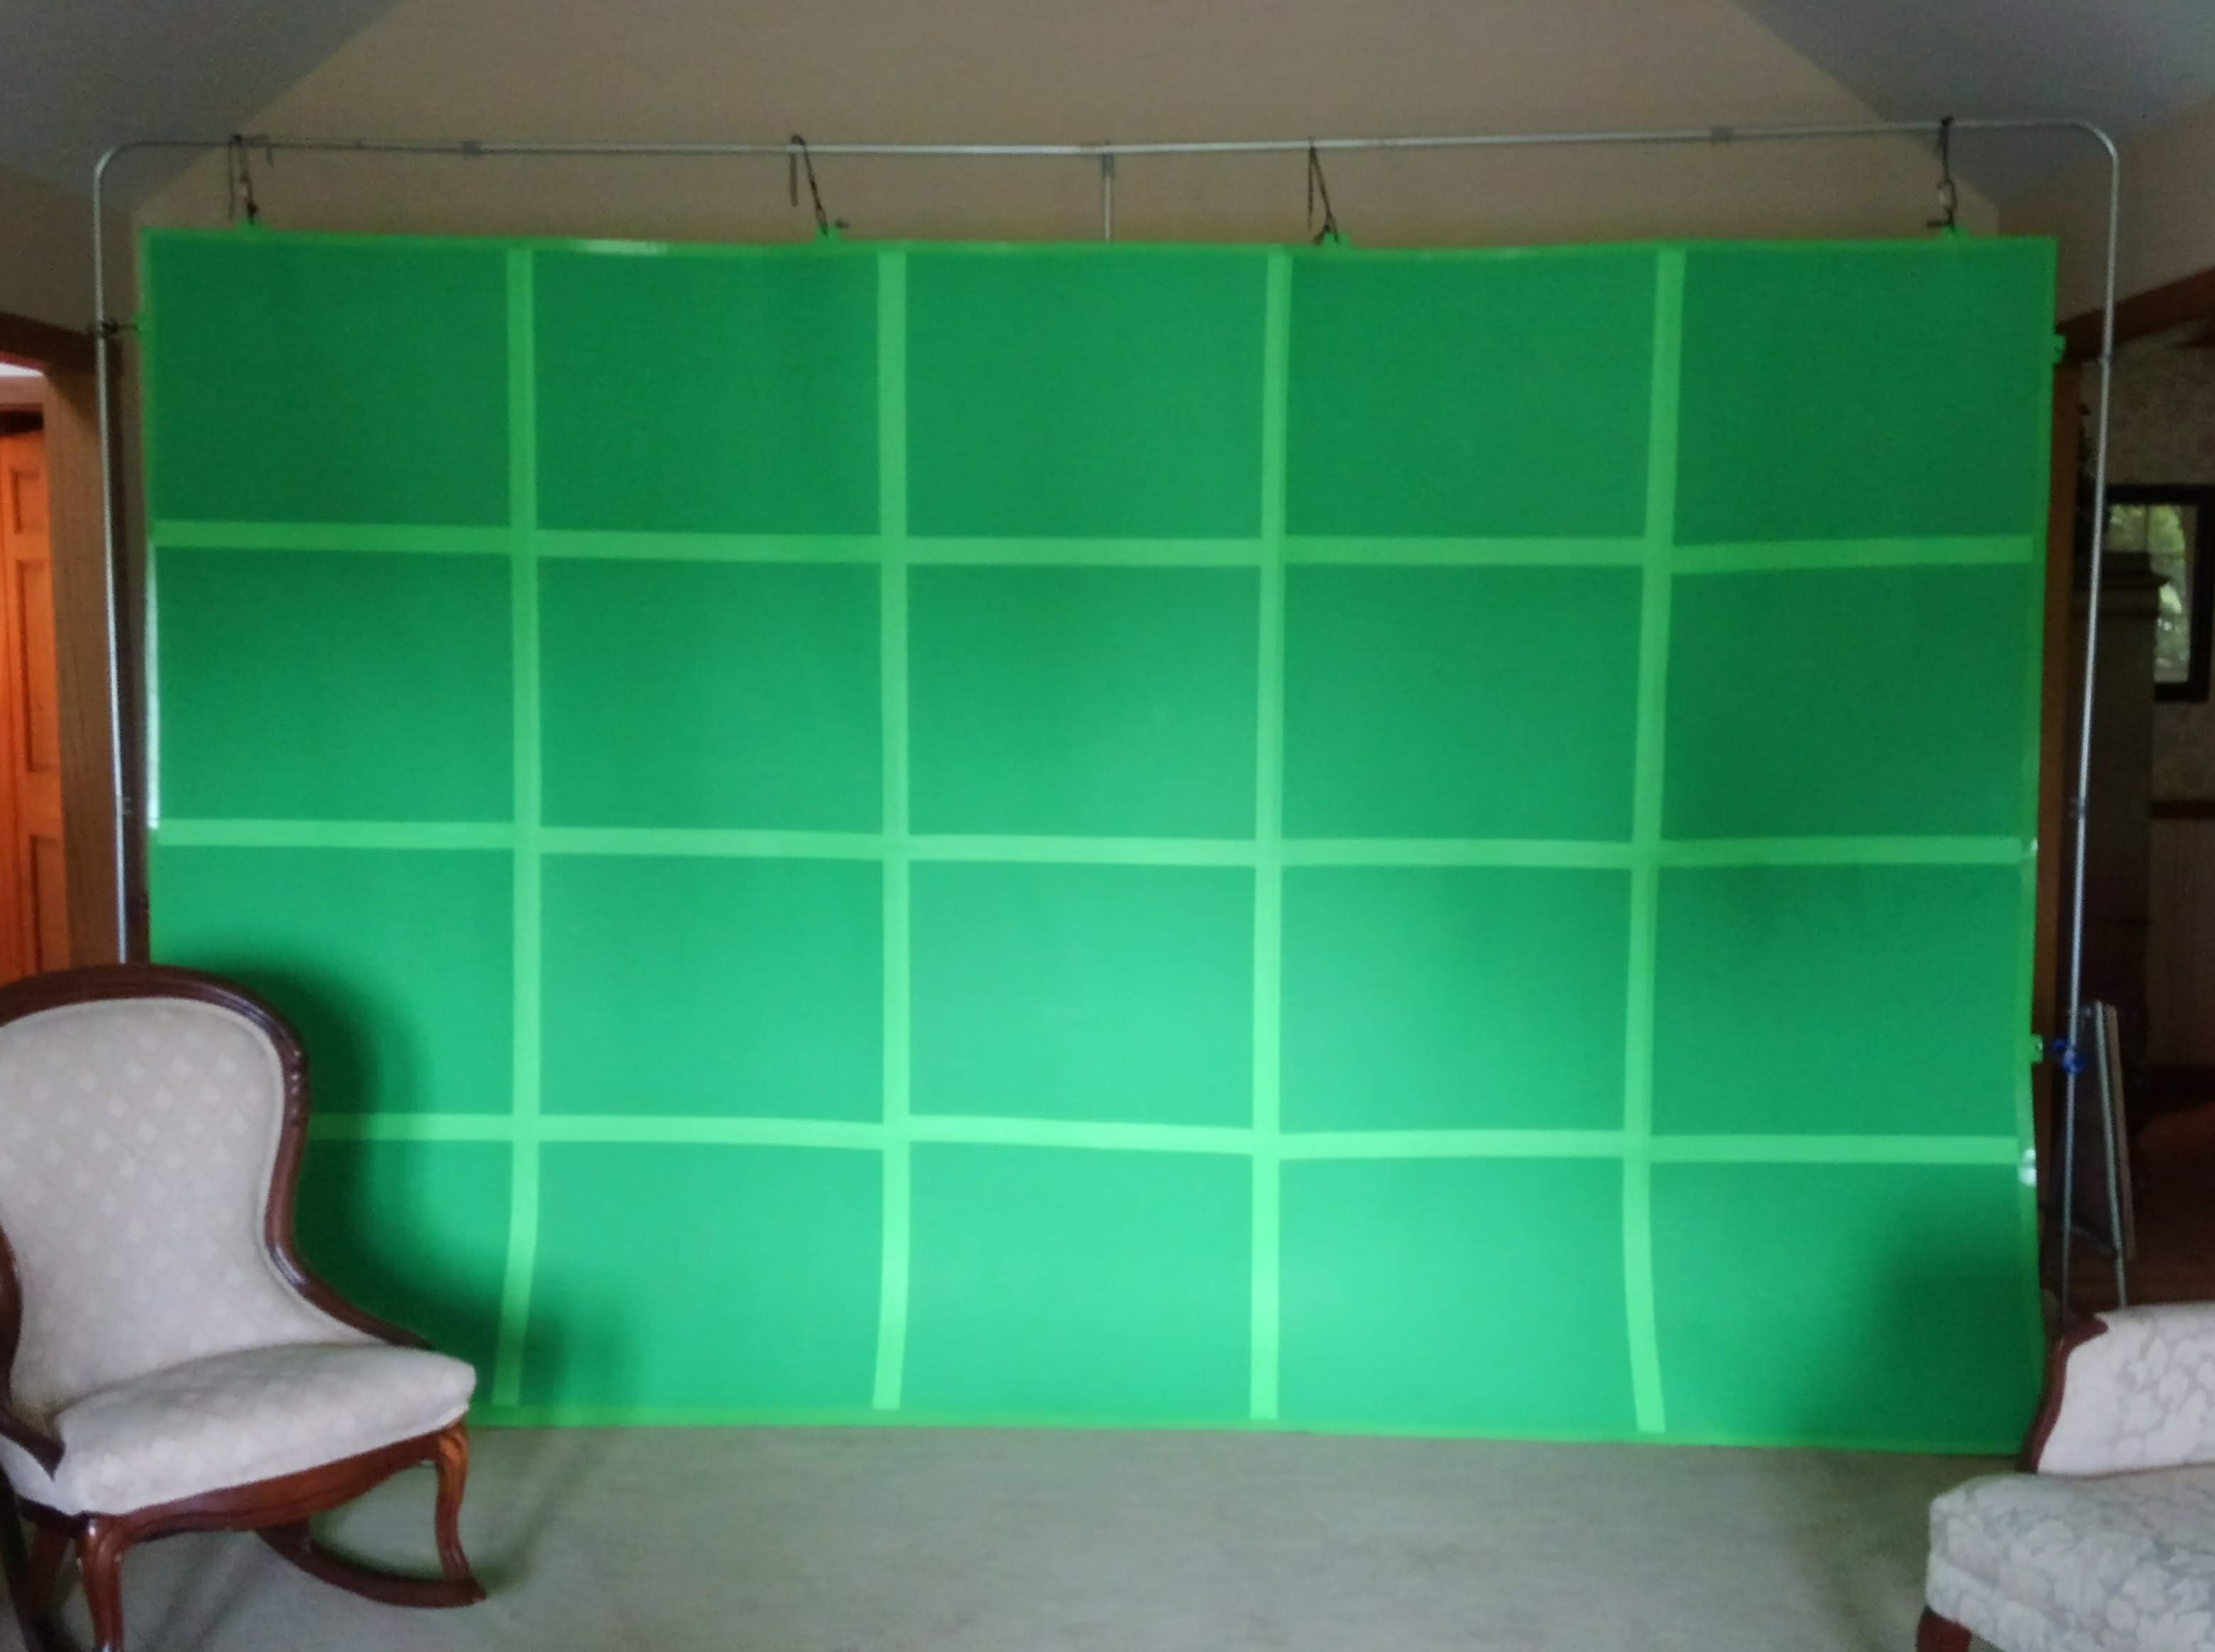 a green screen suspended from a self-standing frame